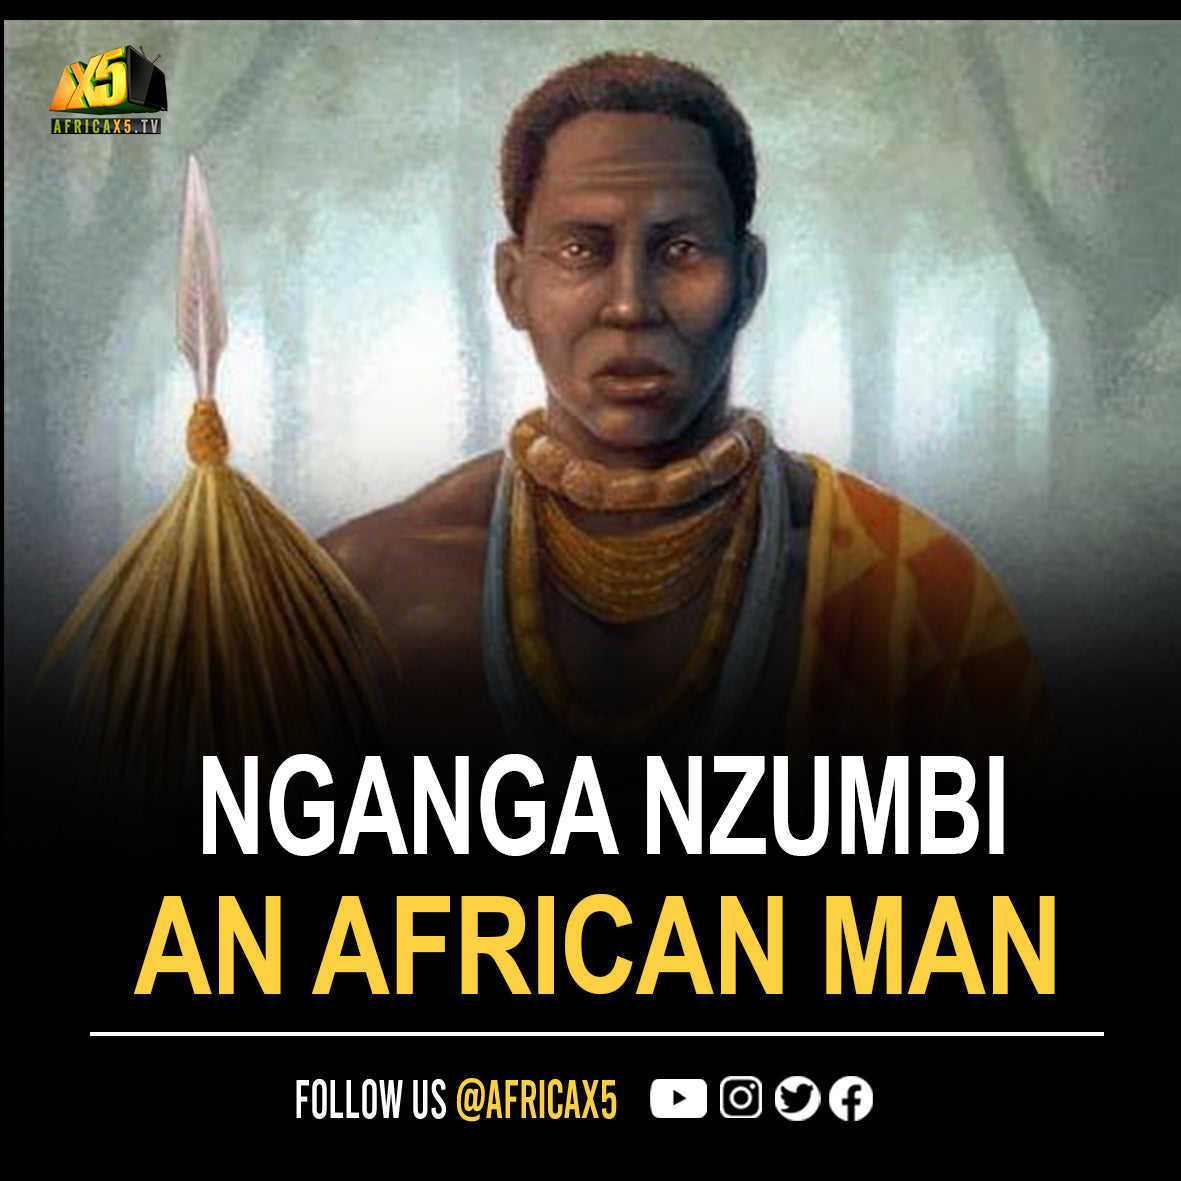 Nganga Nzumbi was an enslaved African who escaped bondage on a sugar plantation and eventually rose to the position of highest authority within the kingdom of Palmares